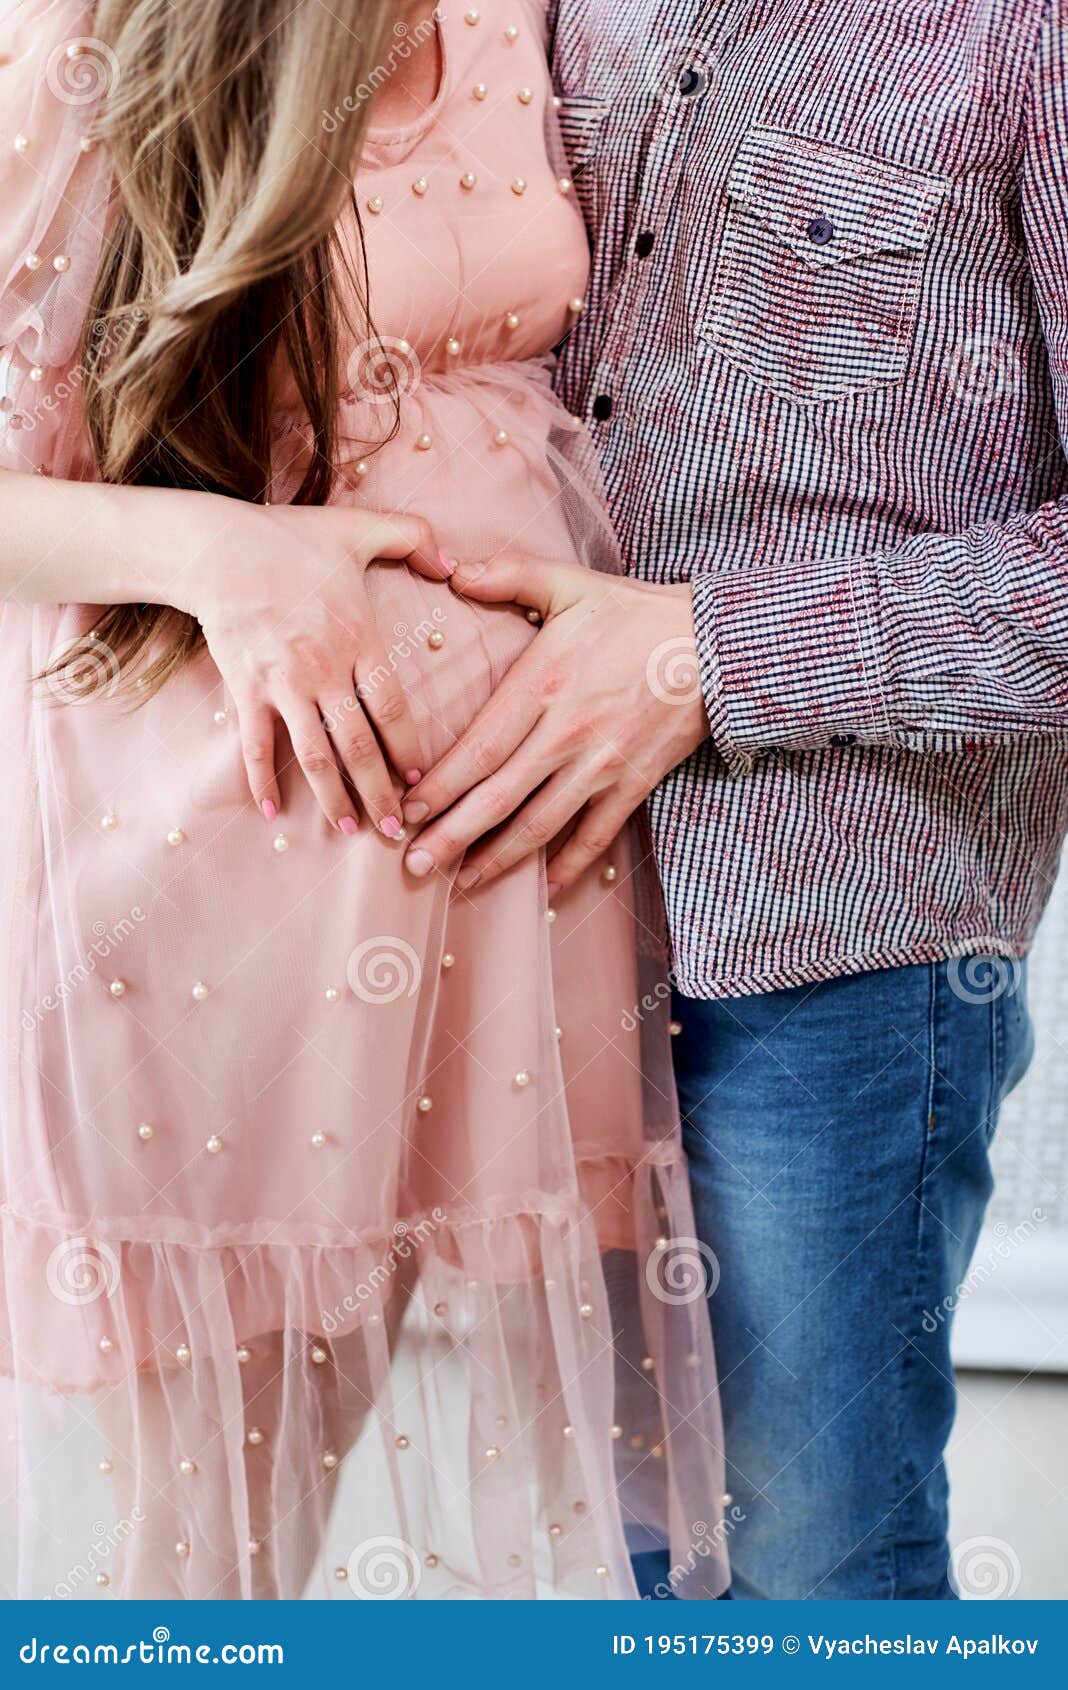 Cropped Image Of Beautiful Pregnant Woman And Her Handsome Husband Stock Image Image Of Birth